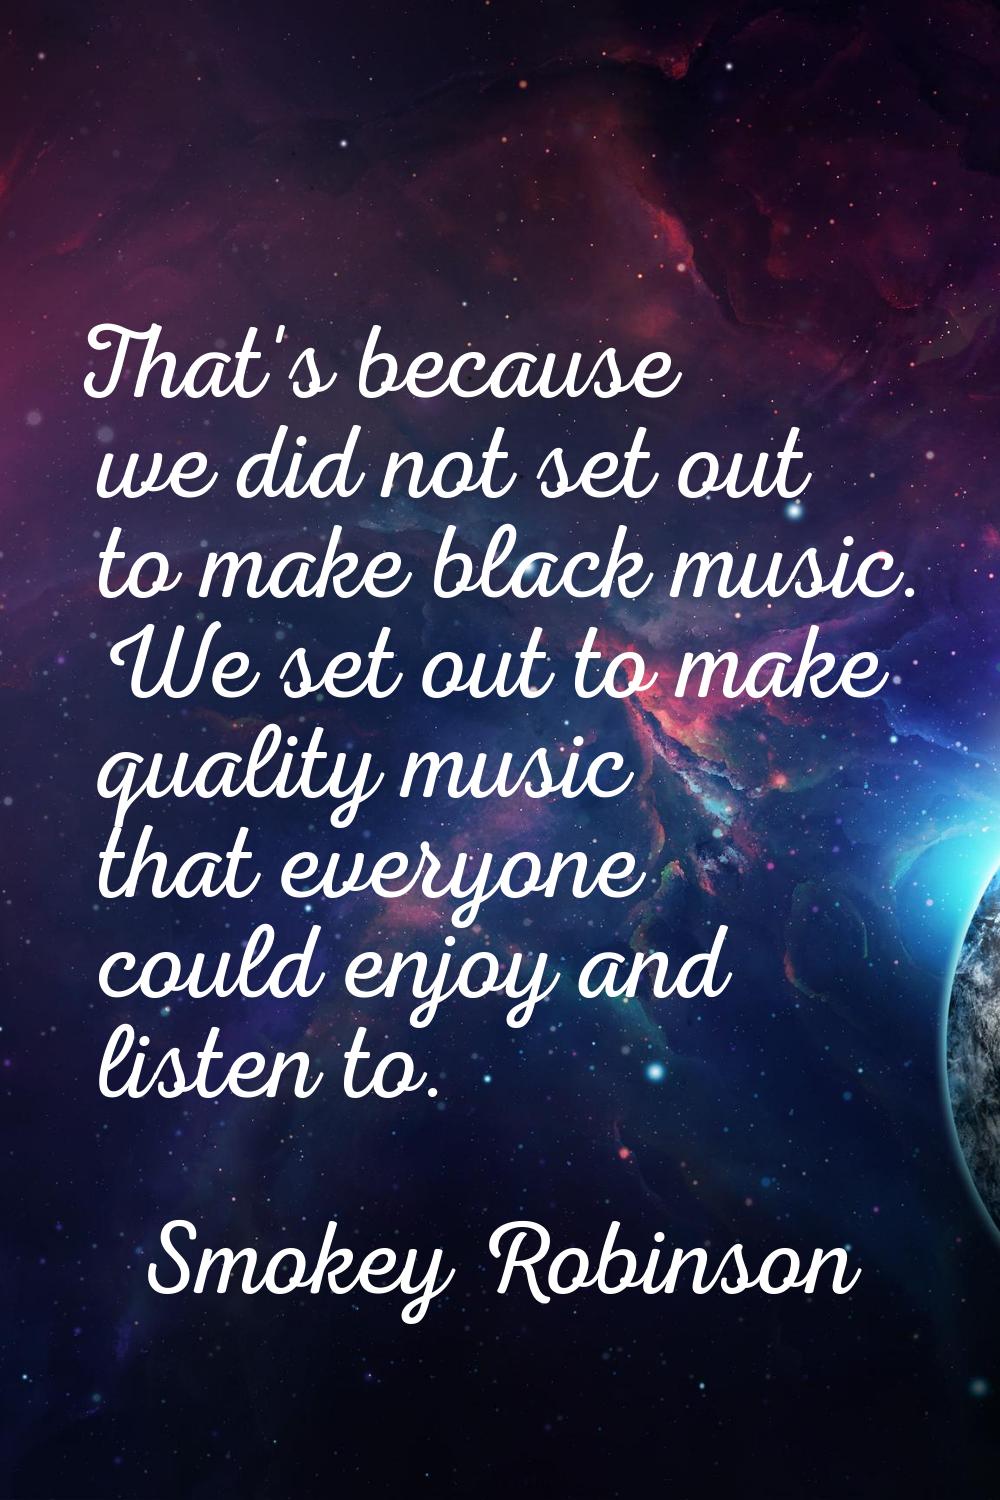 That's because we did not set out to make black music. We set out to make quality music that everyo